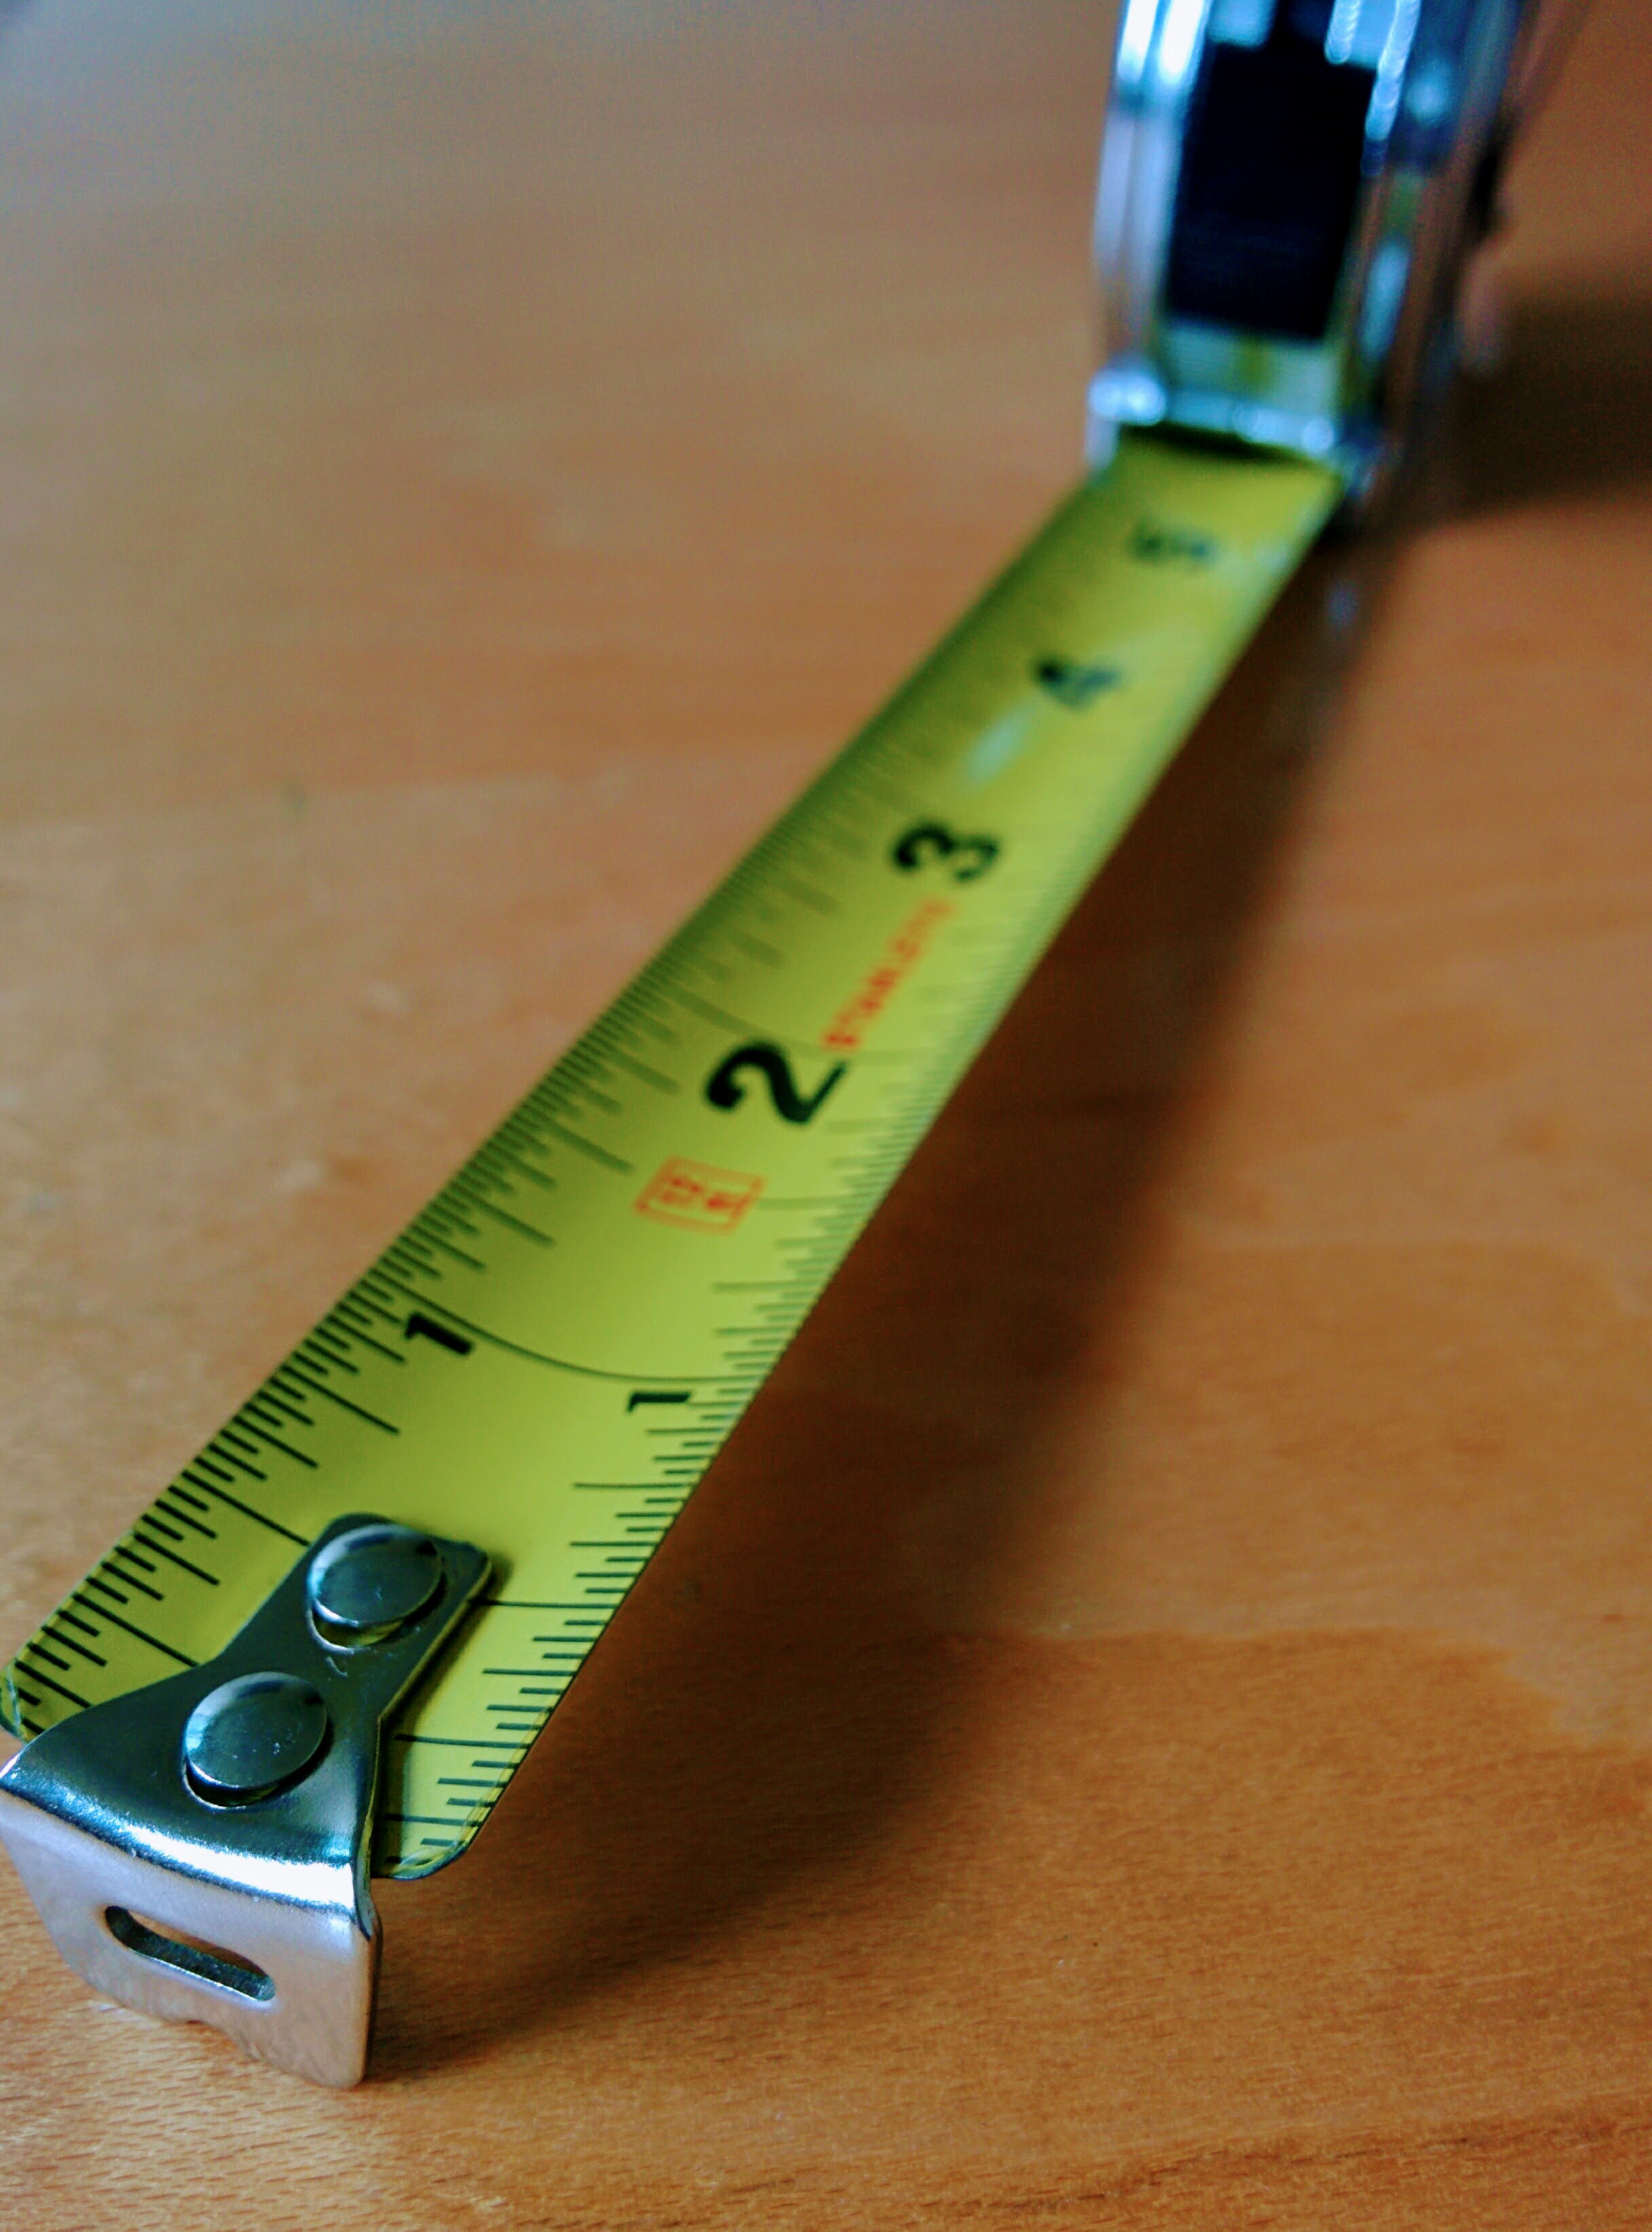 2.37 inches on a measurement tape